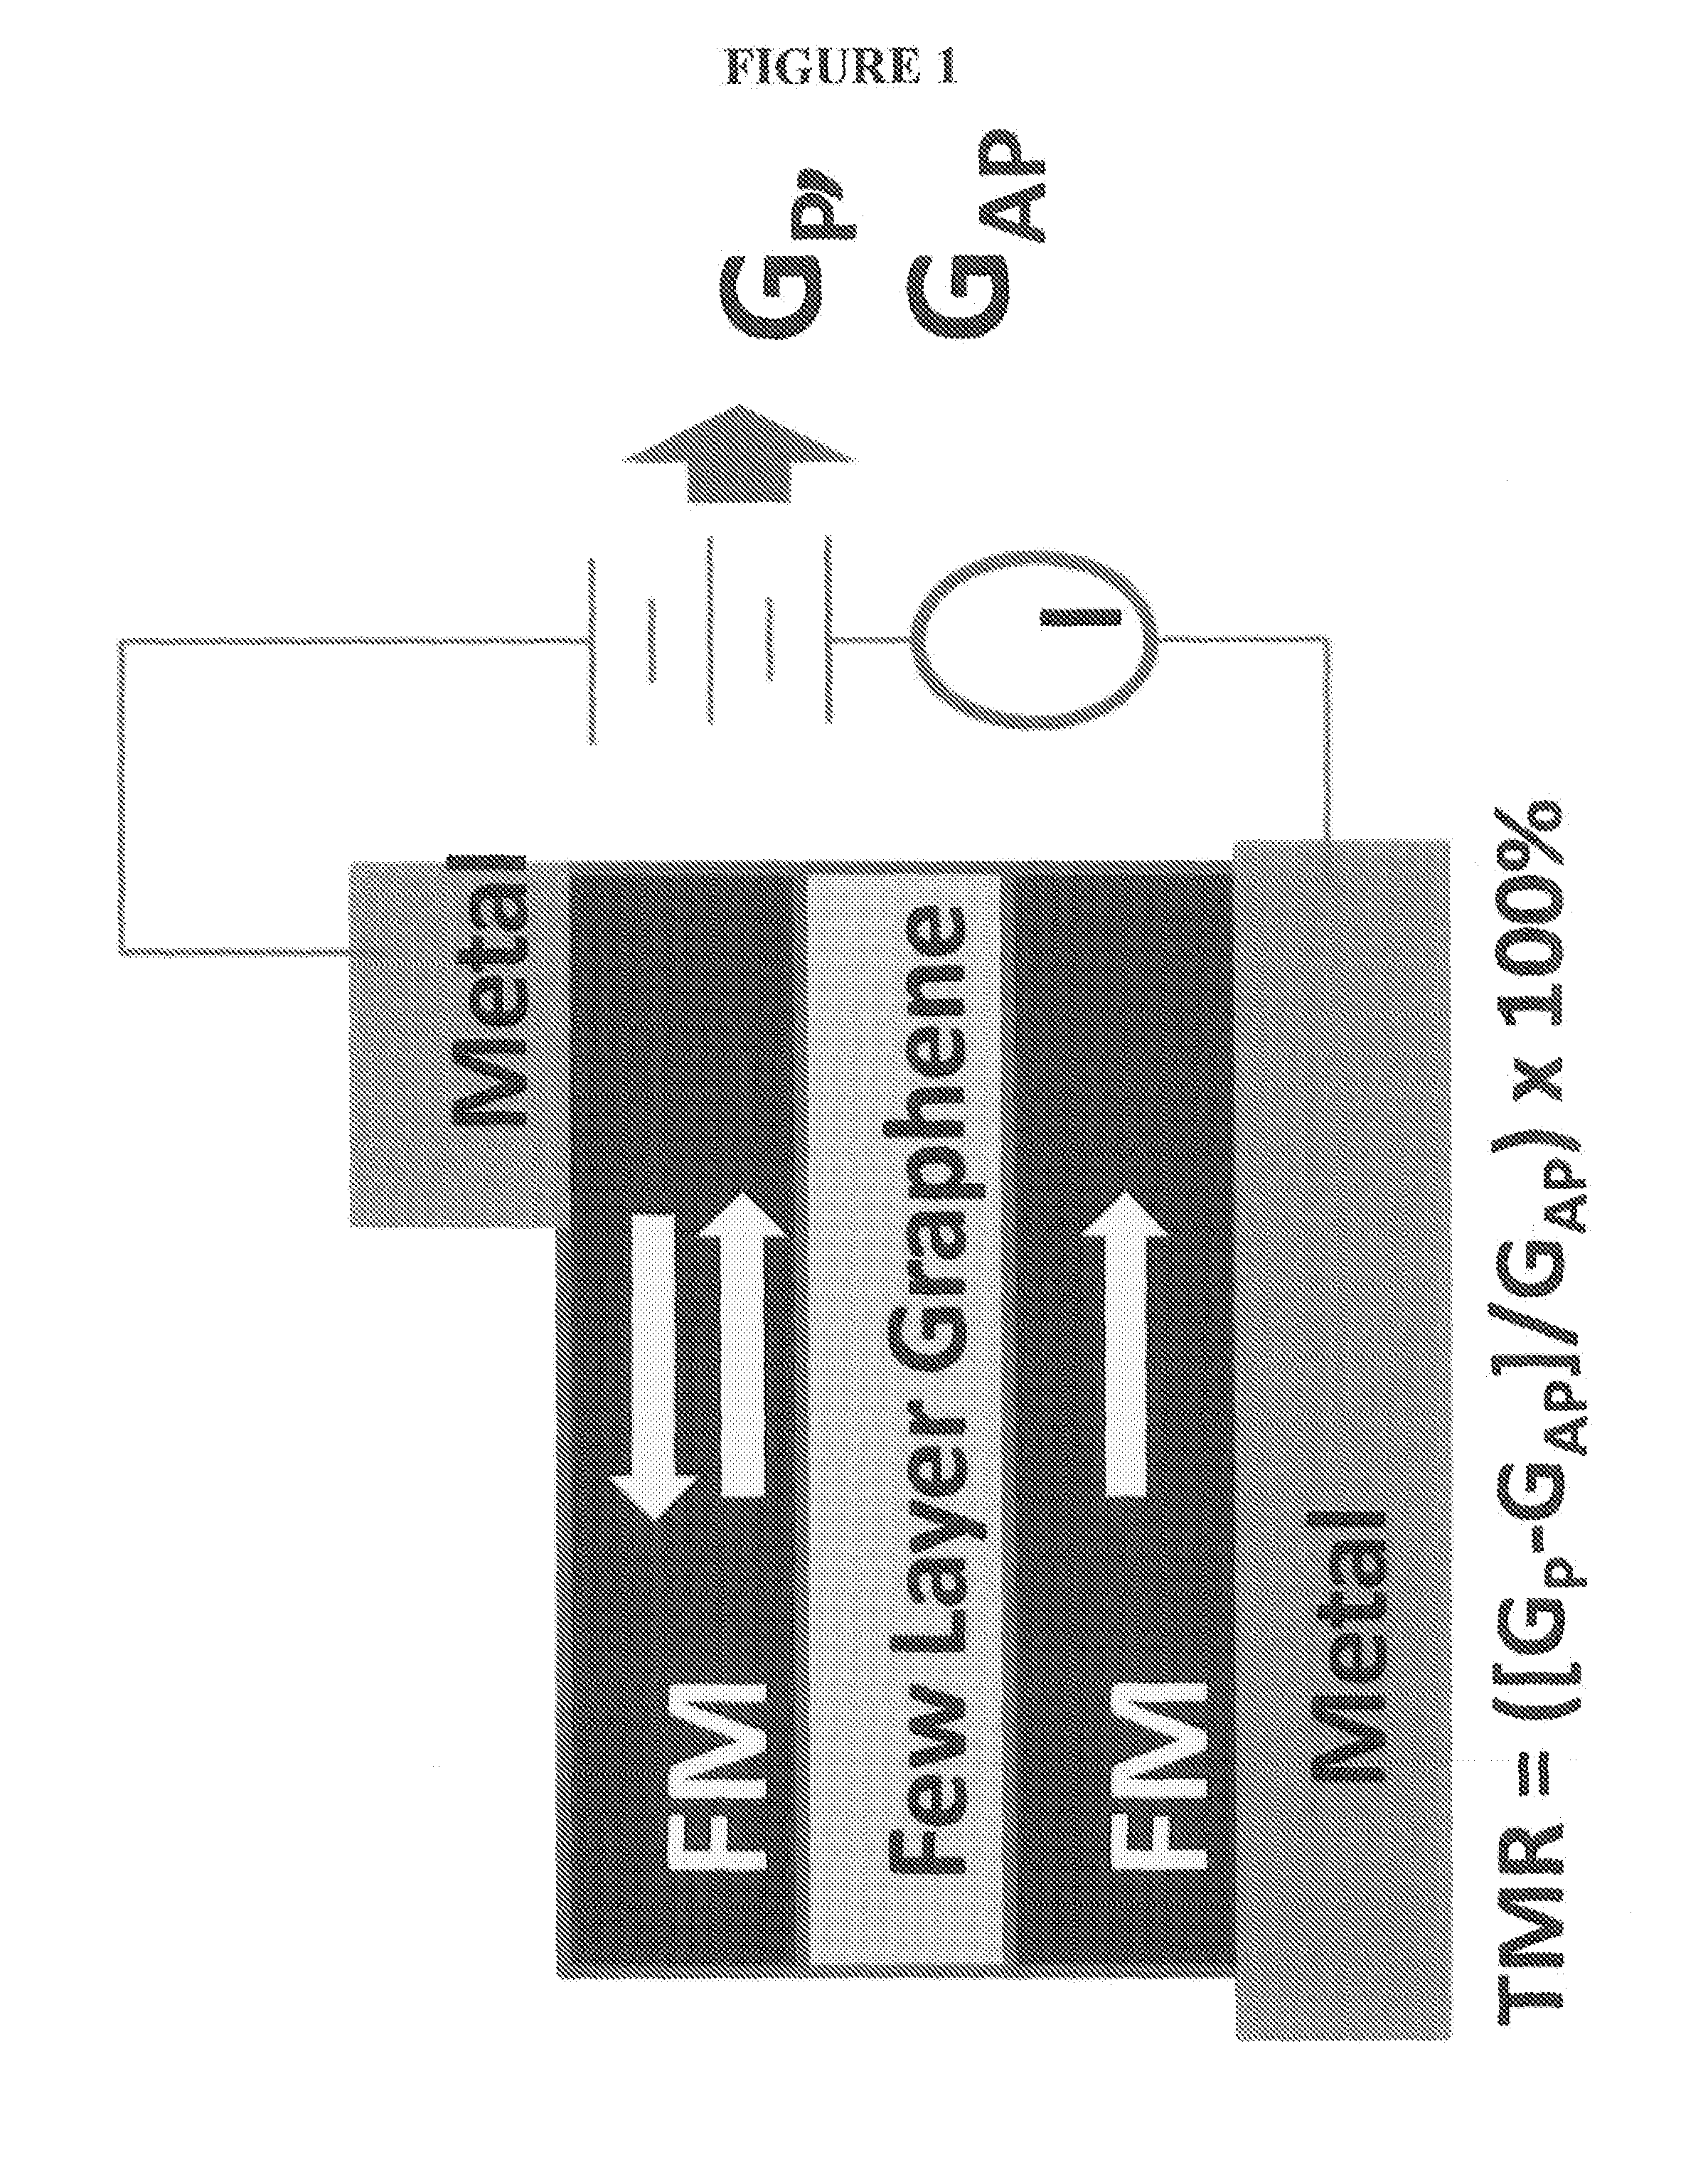 Graphene magnetic tunnel junction spin filters and methods of making